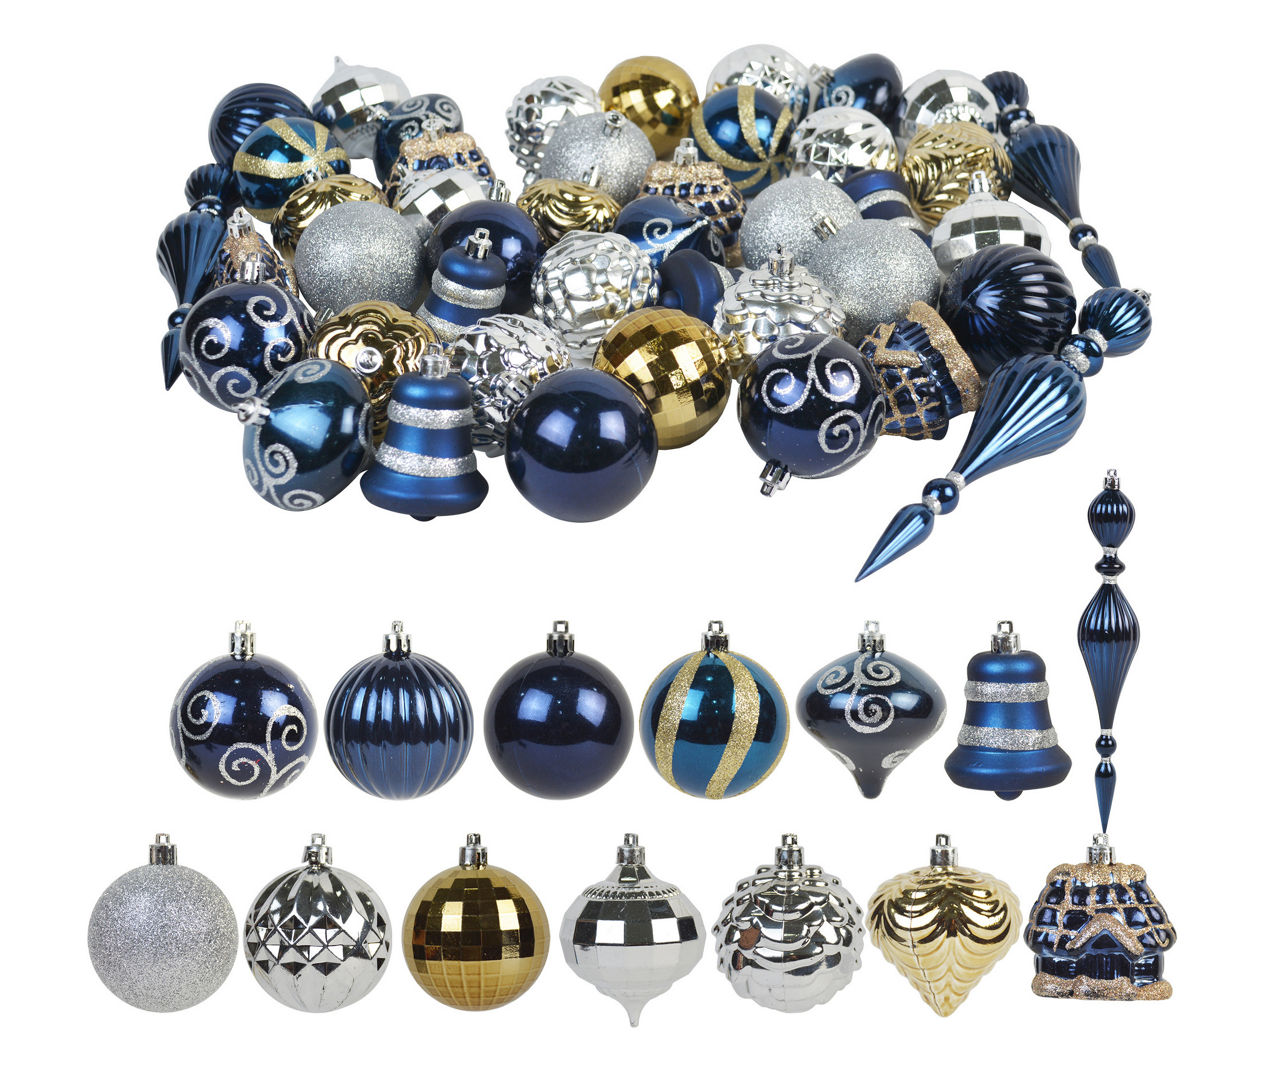 Jeco Black, Gold & Silver Mixed Ball Ornaments, 100-Pack